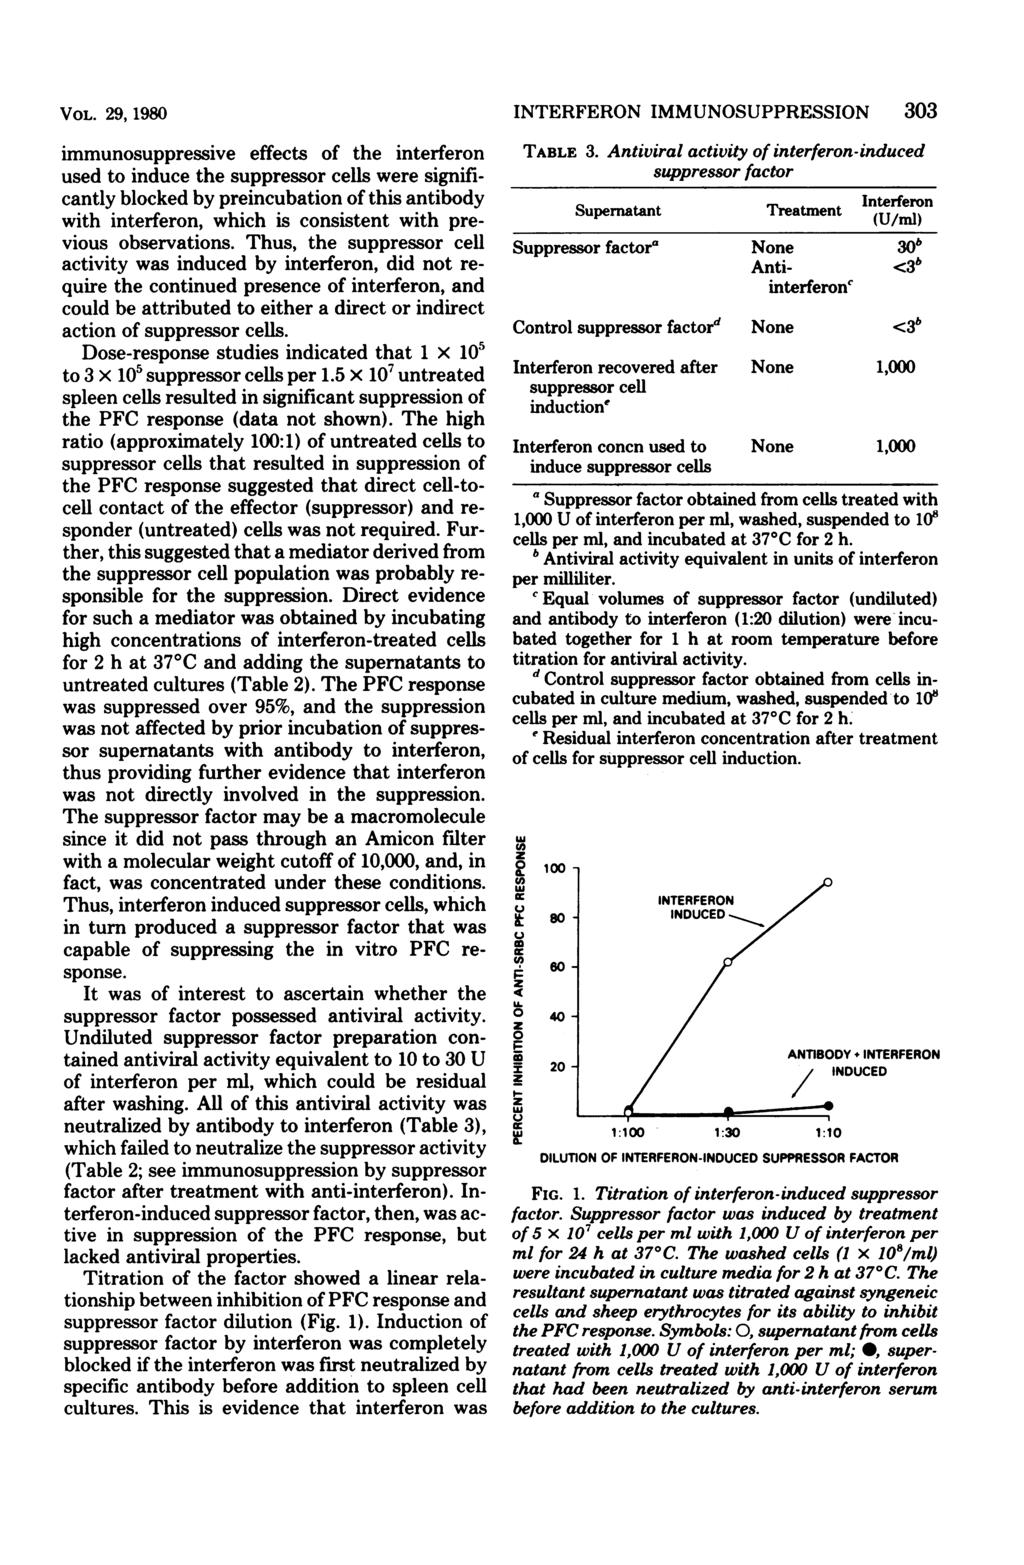 VOL. 29, 1980 immunosuppressive effects of the interferon used to induce the suppressor cells were significantly blocked by preincubation of this antibody with interferon, which is consistent with